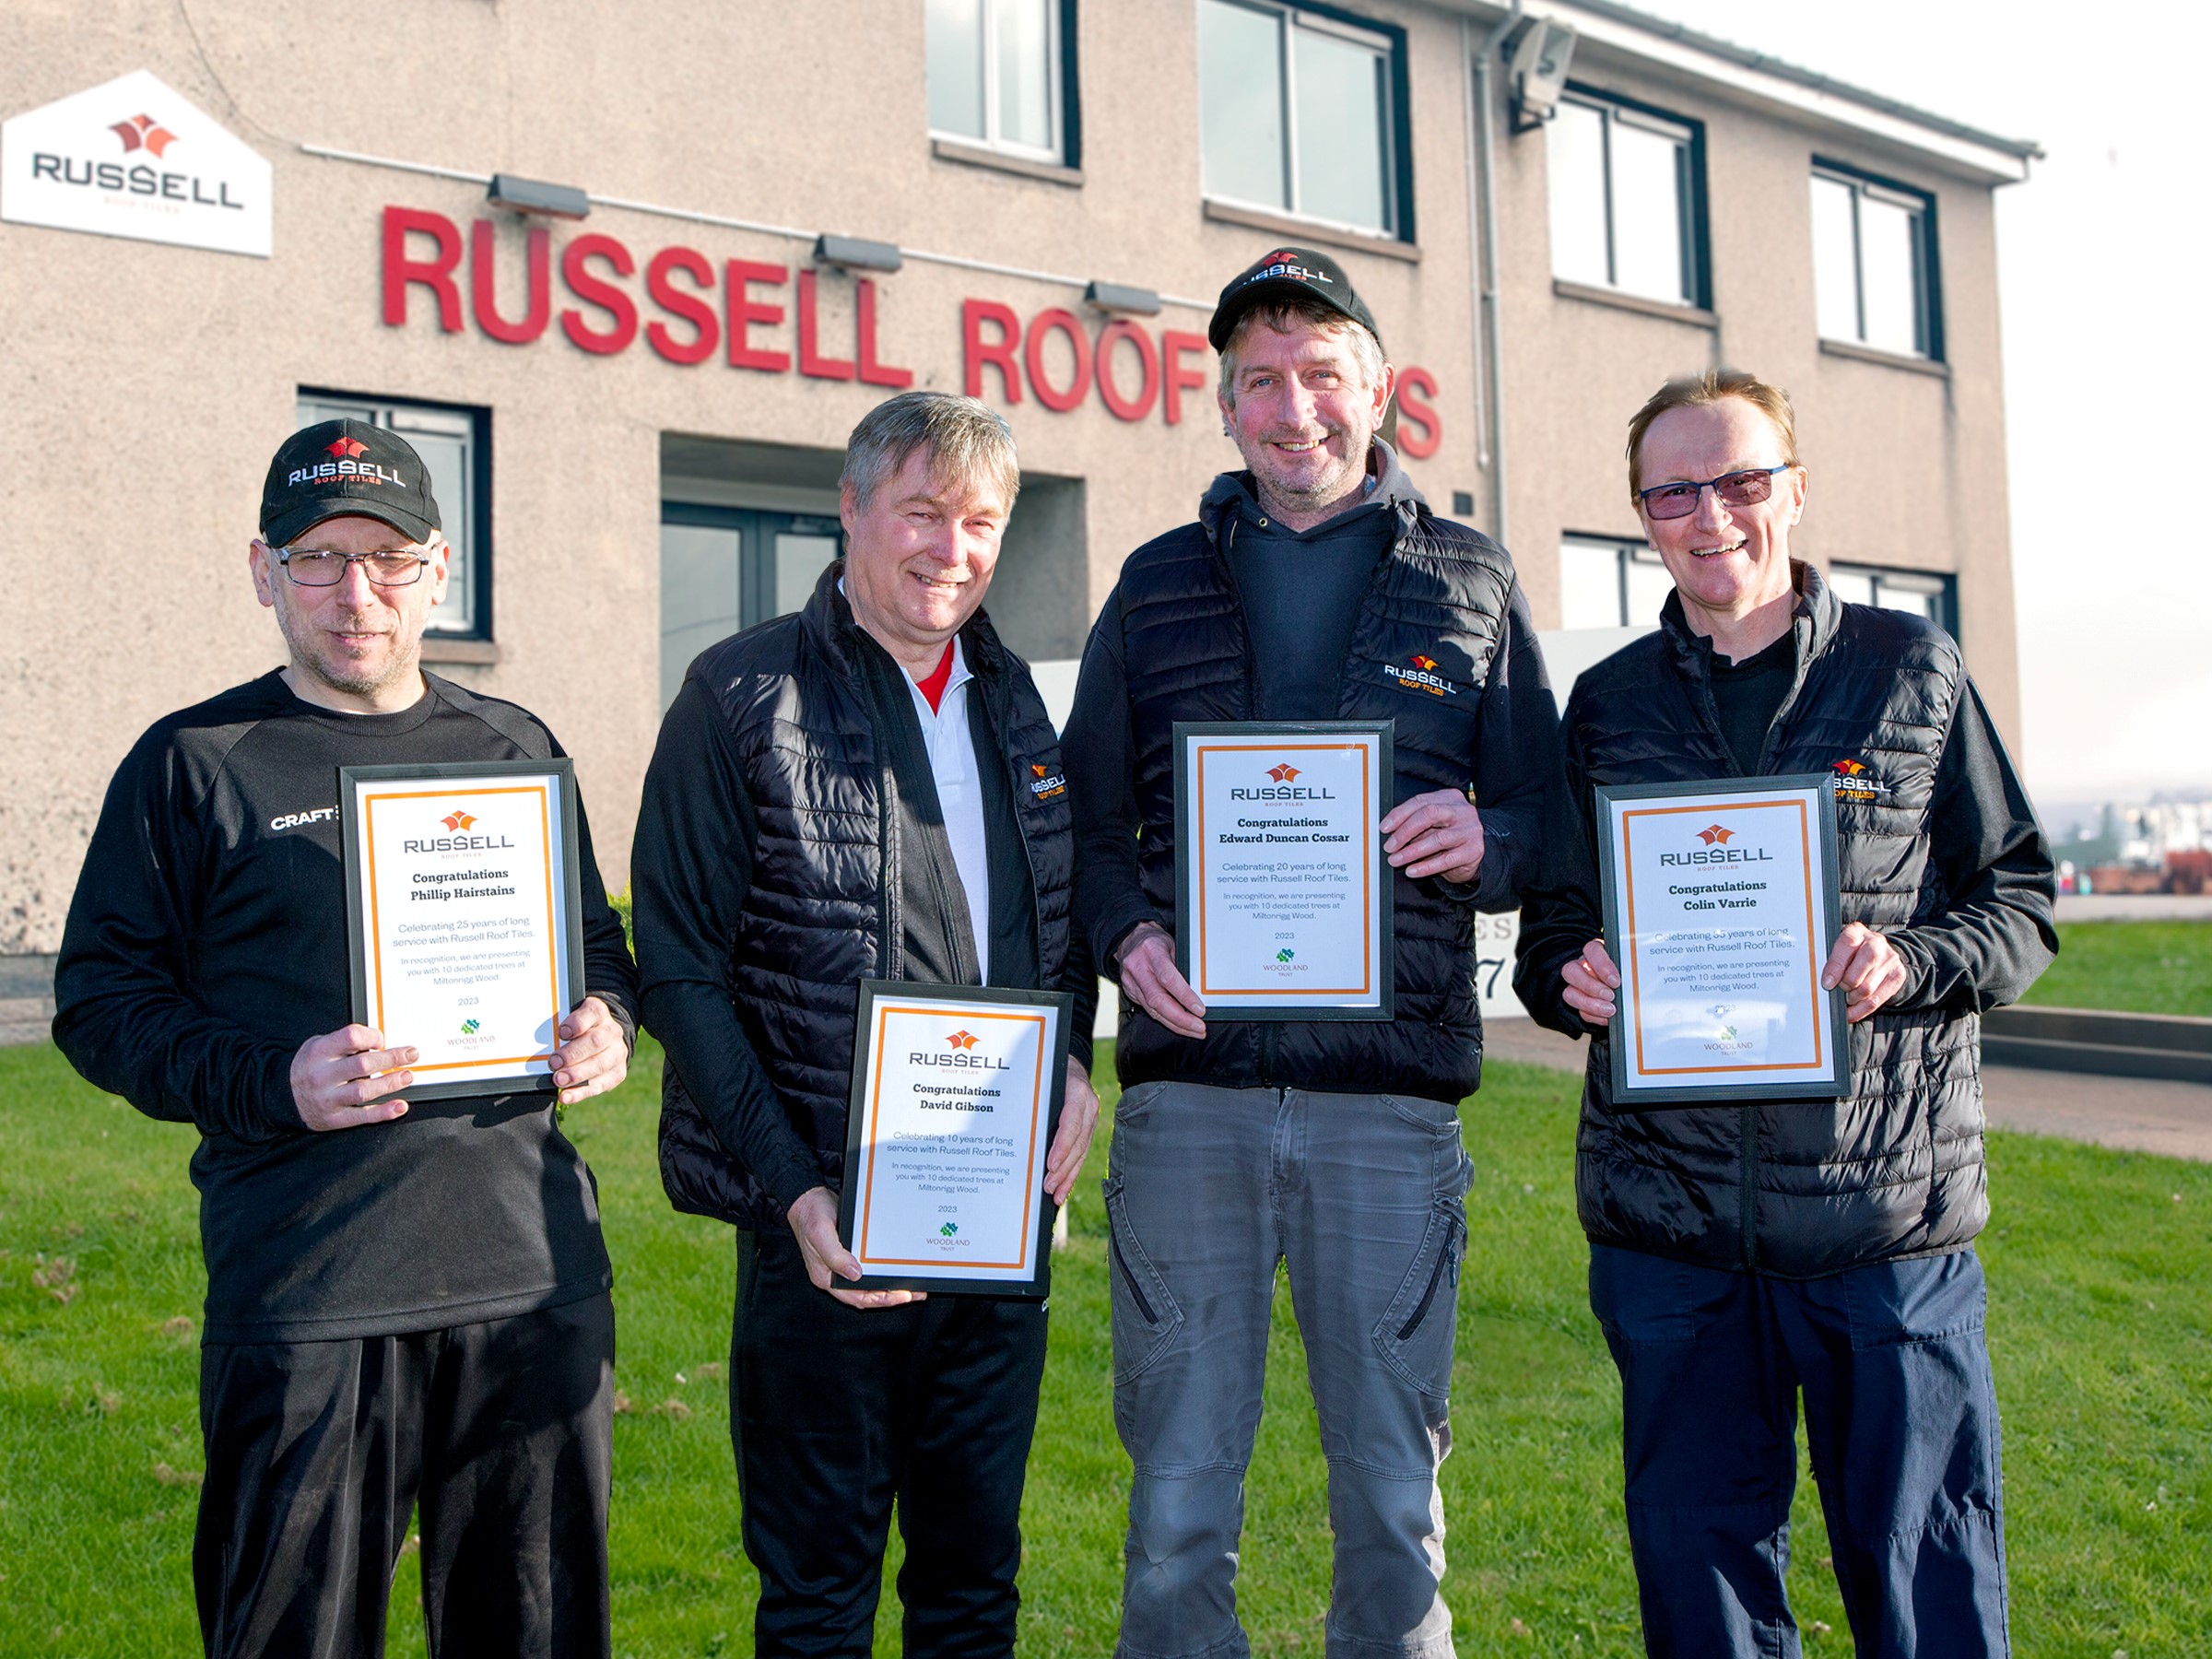 Long service legacy reflects sustainability credentials at Russell Roof Tiles